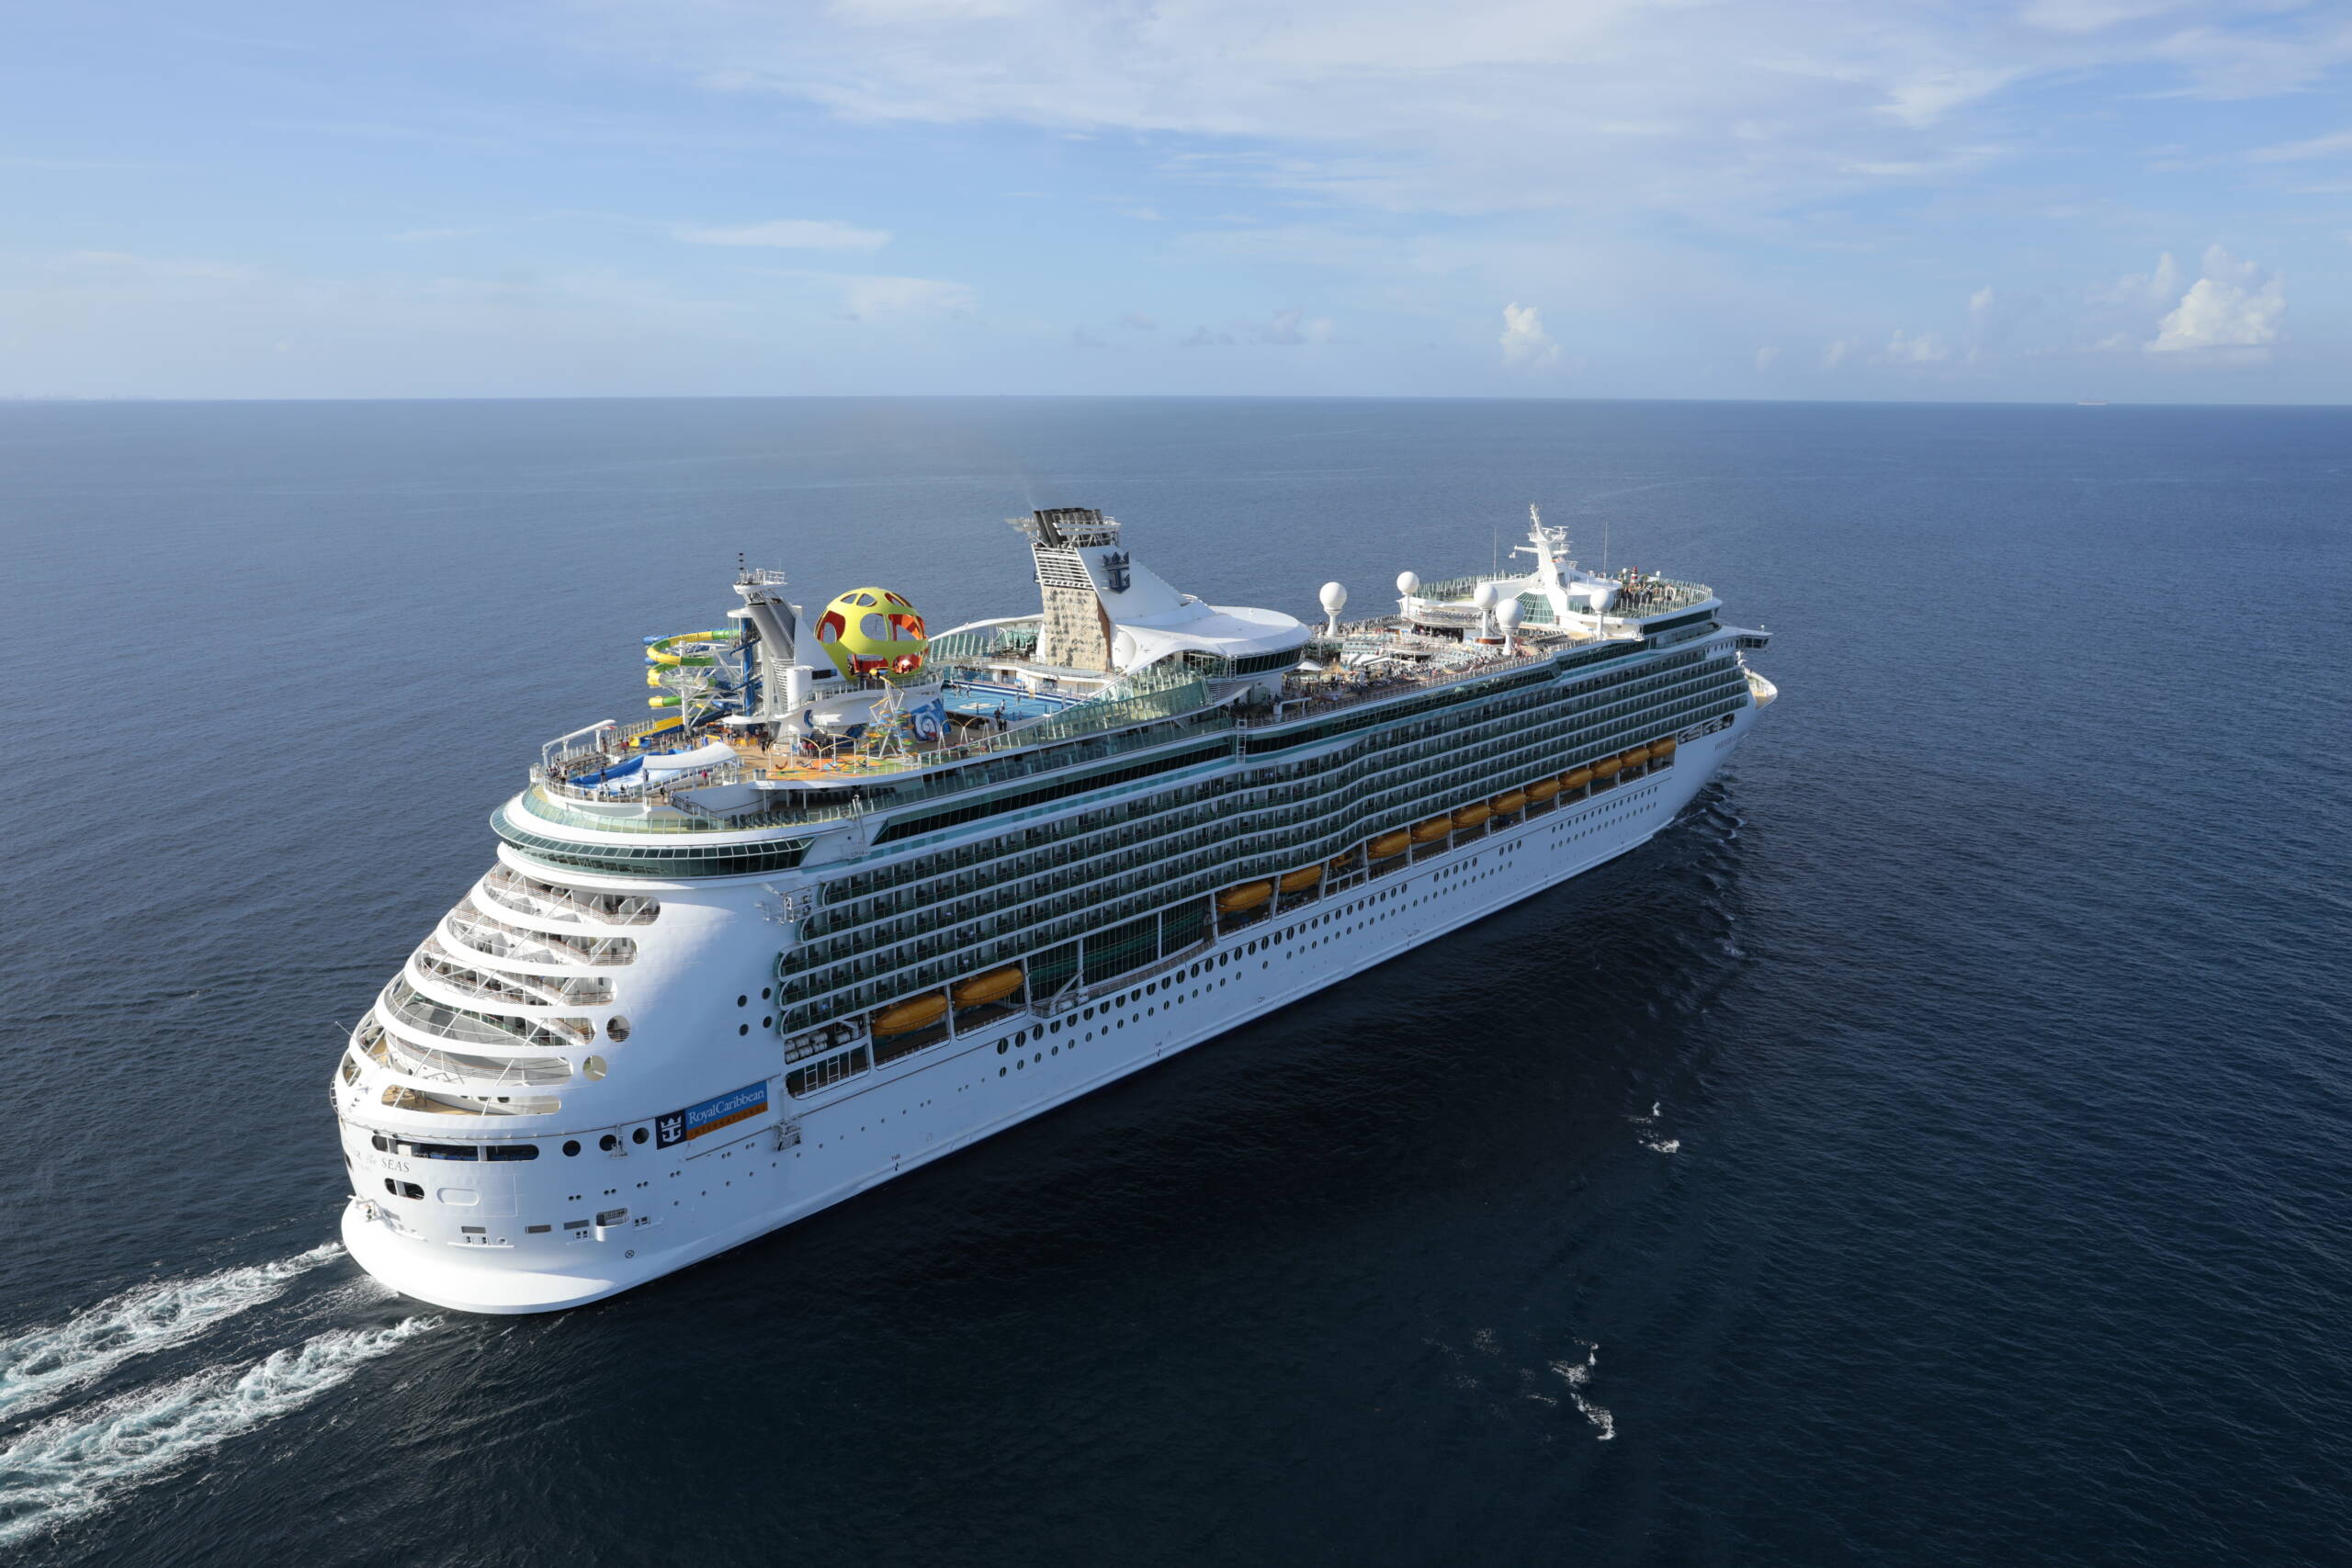 The 5 best destinations you can visit on a Royal Caribbean cruise